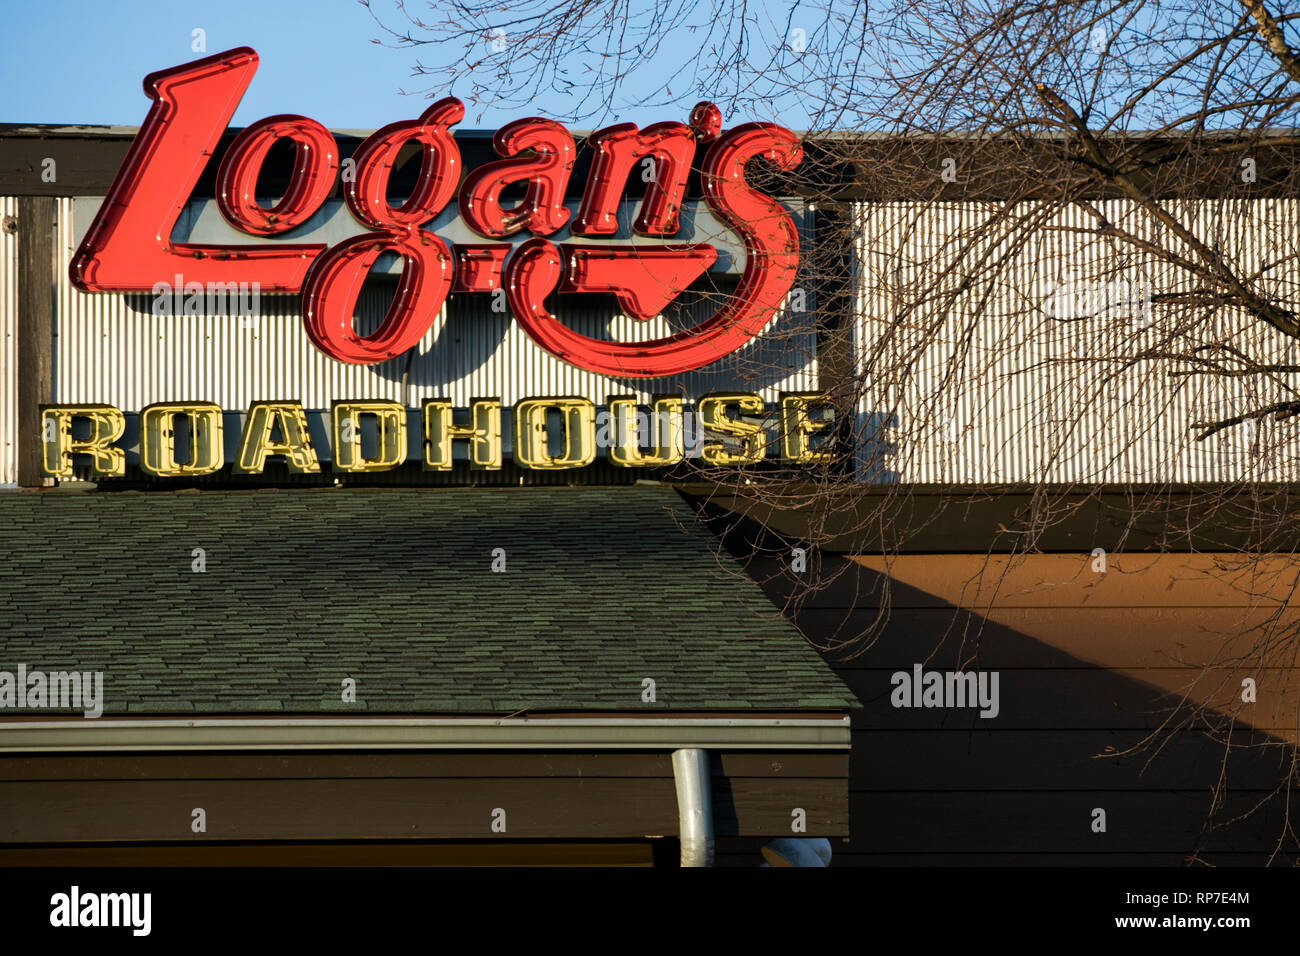 A logo sign outside of a Logan's Roadhouse restaurant location in Fredericksburg, Virginia on February 19, 2019. Stock Photo